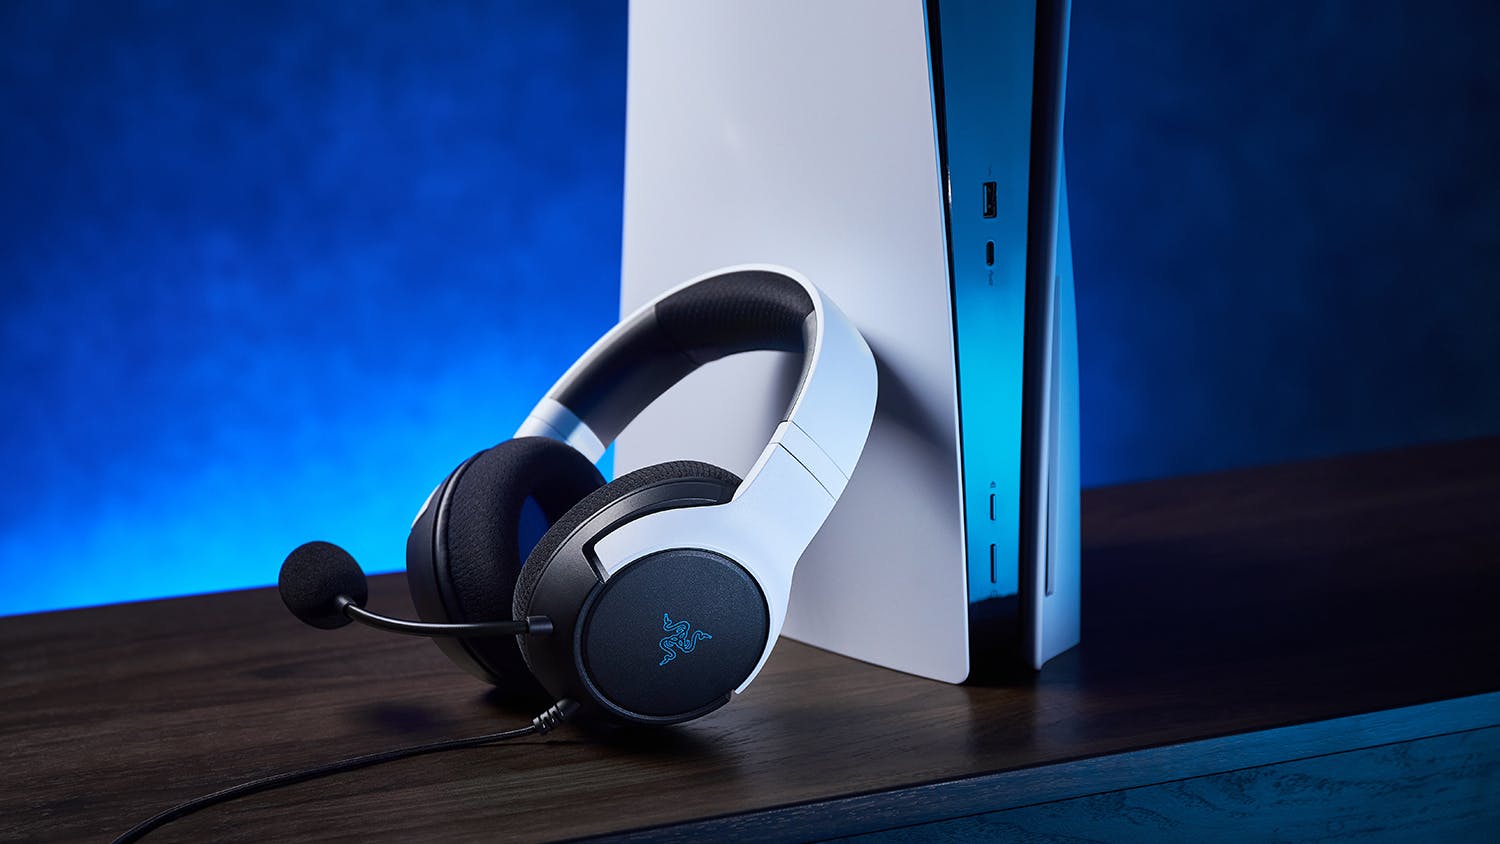 Razer Kaira X Wired Gaming Headset for Playstation